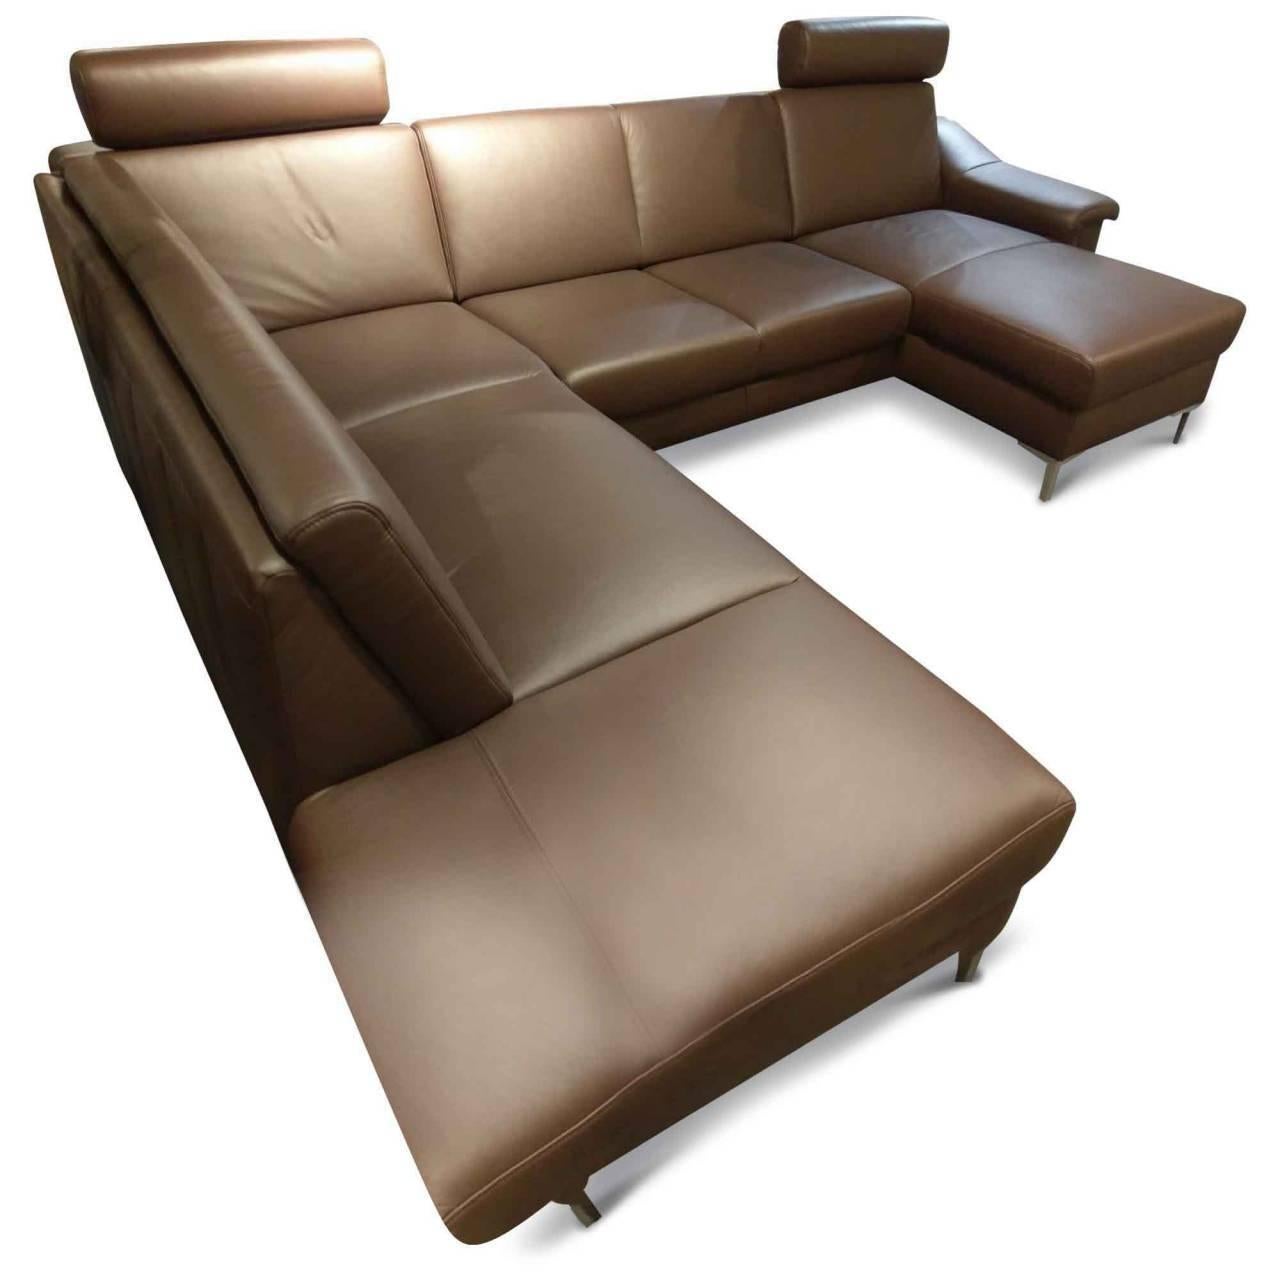 We are delighted to present to you the U-formed sofa 